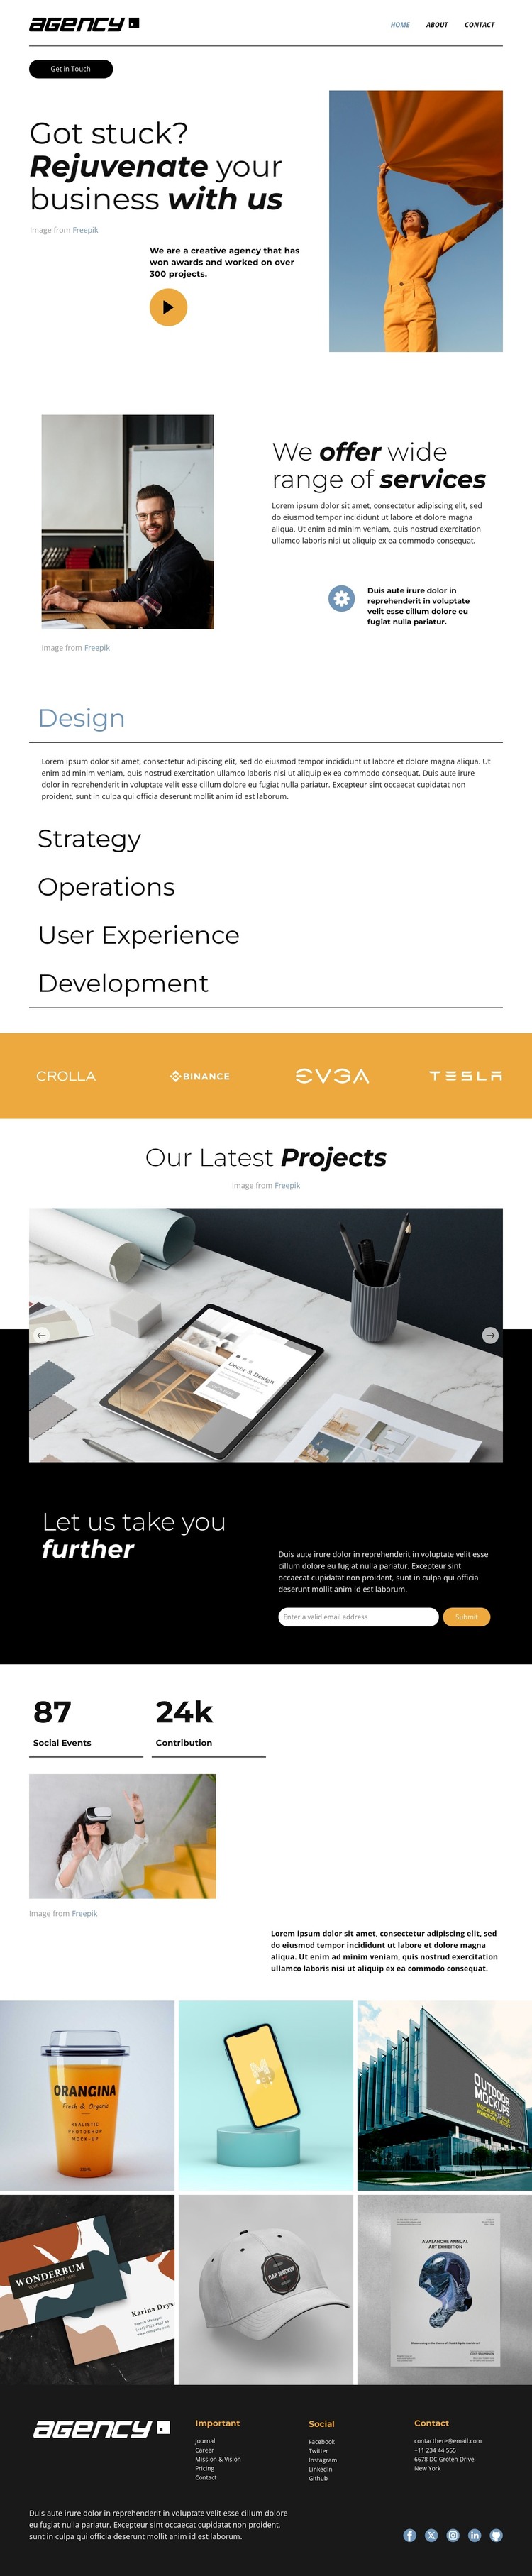 Scale to greater success WordPress Theme